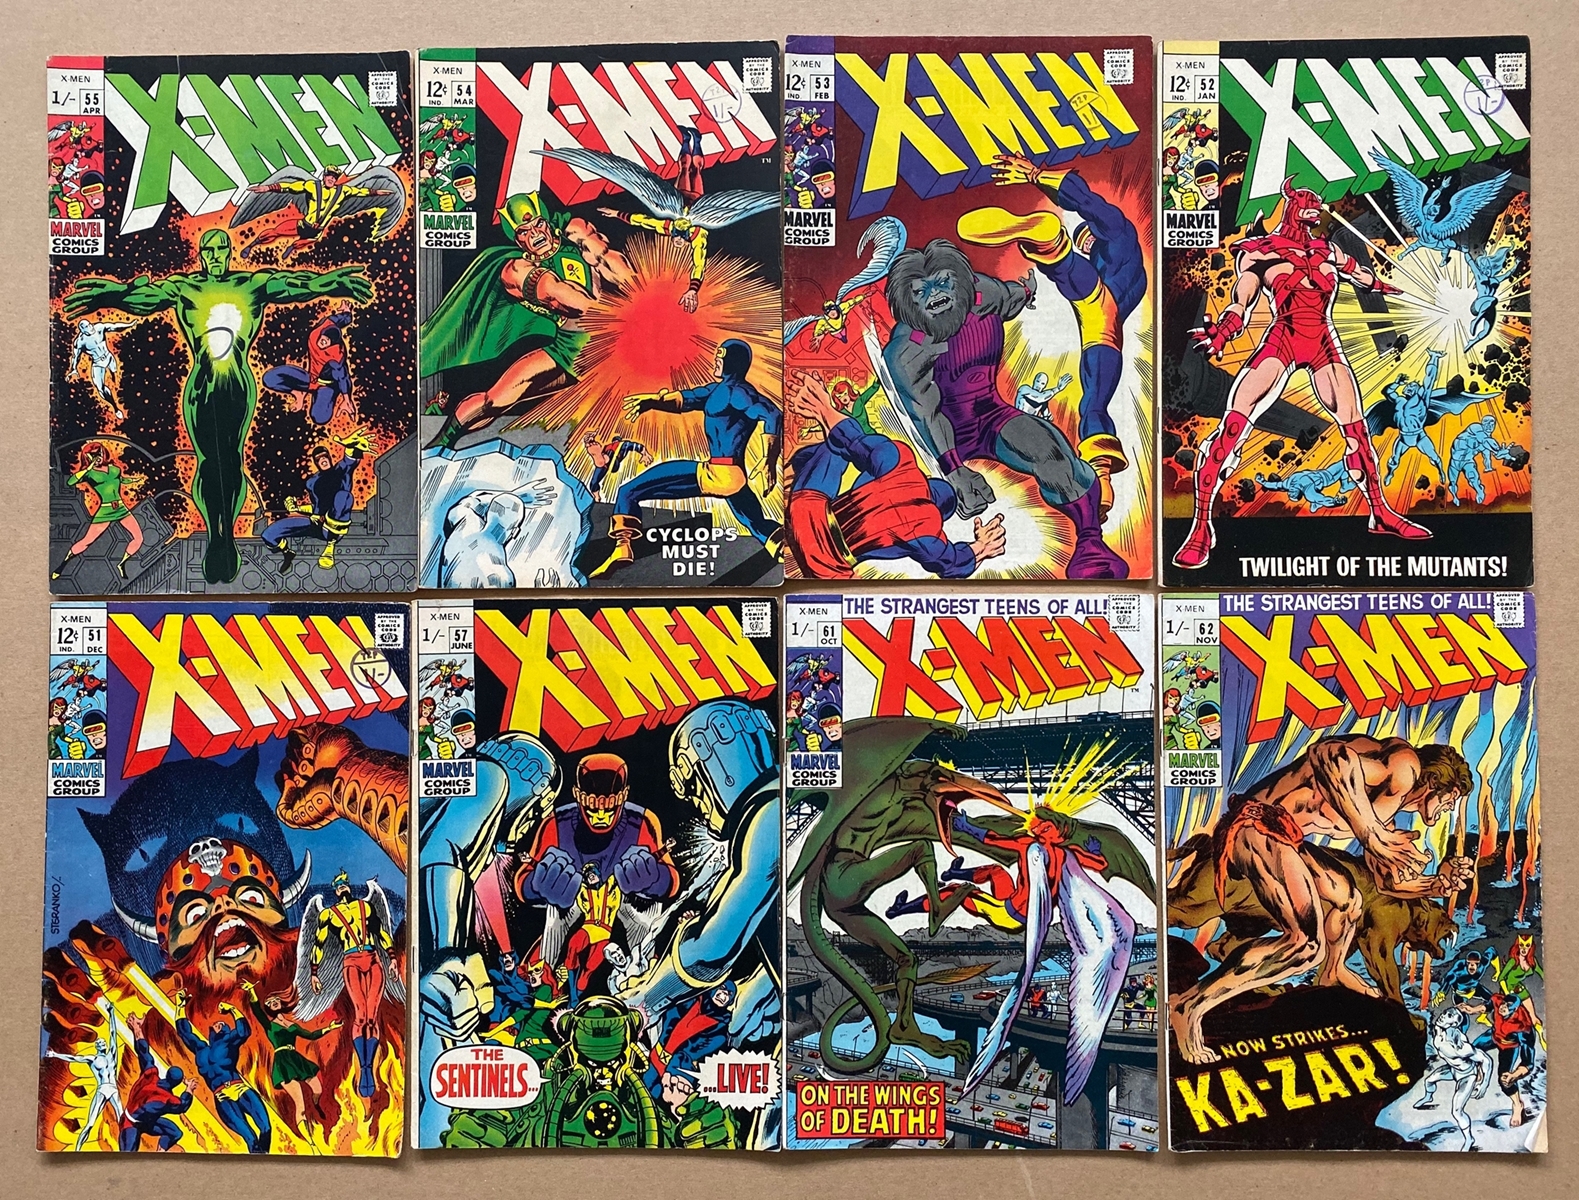 X-MEN #51, 52, 53, 54, 55, 57, 61, 62 (8 in Lot) - (1968/69 - MARVEL - Cents/Pence Stamp/Pence